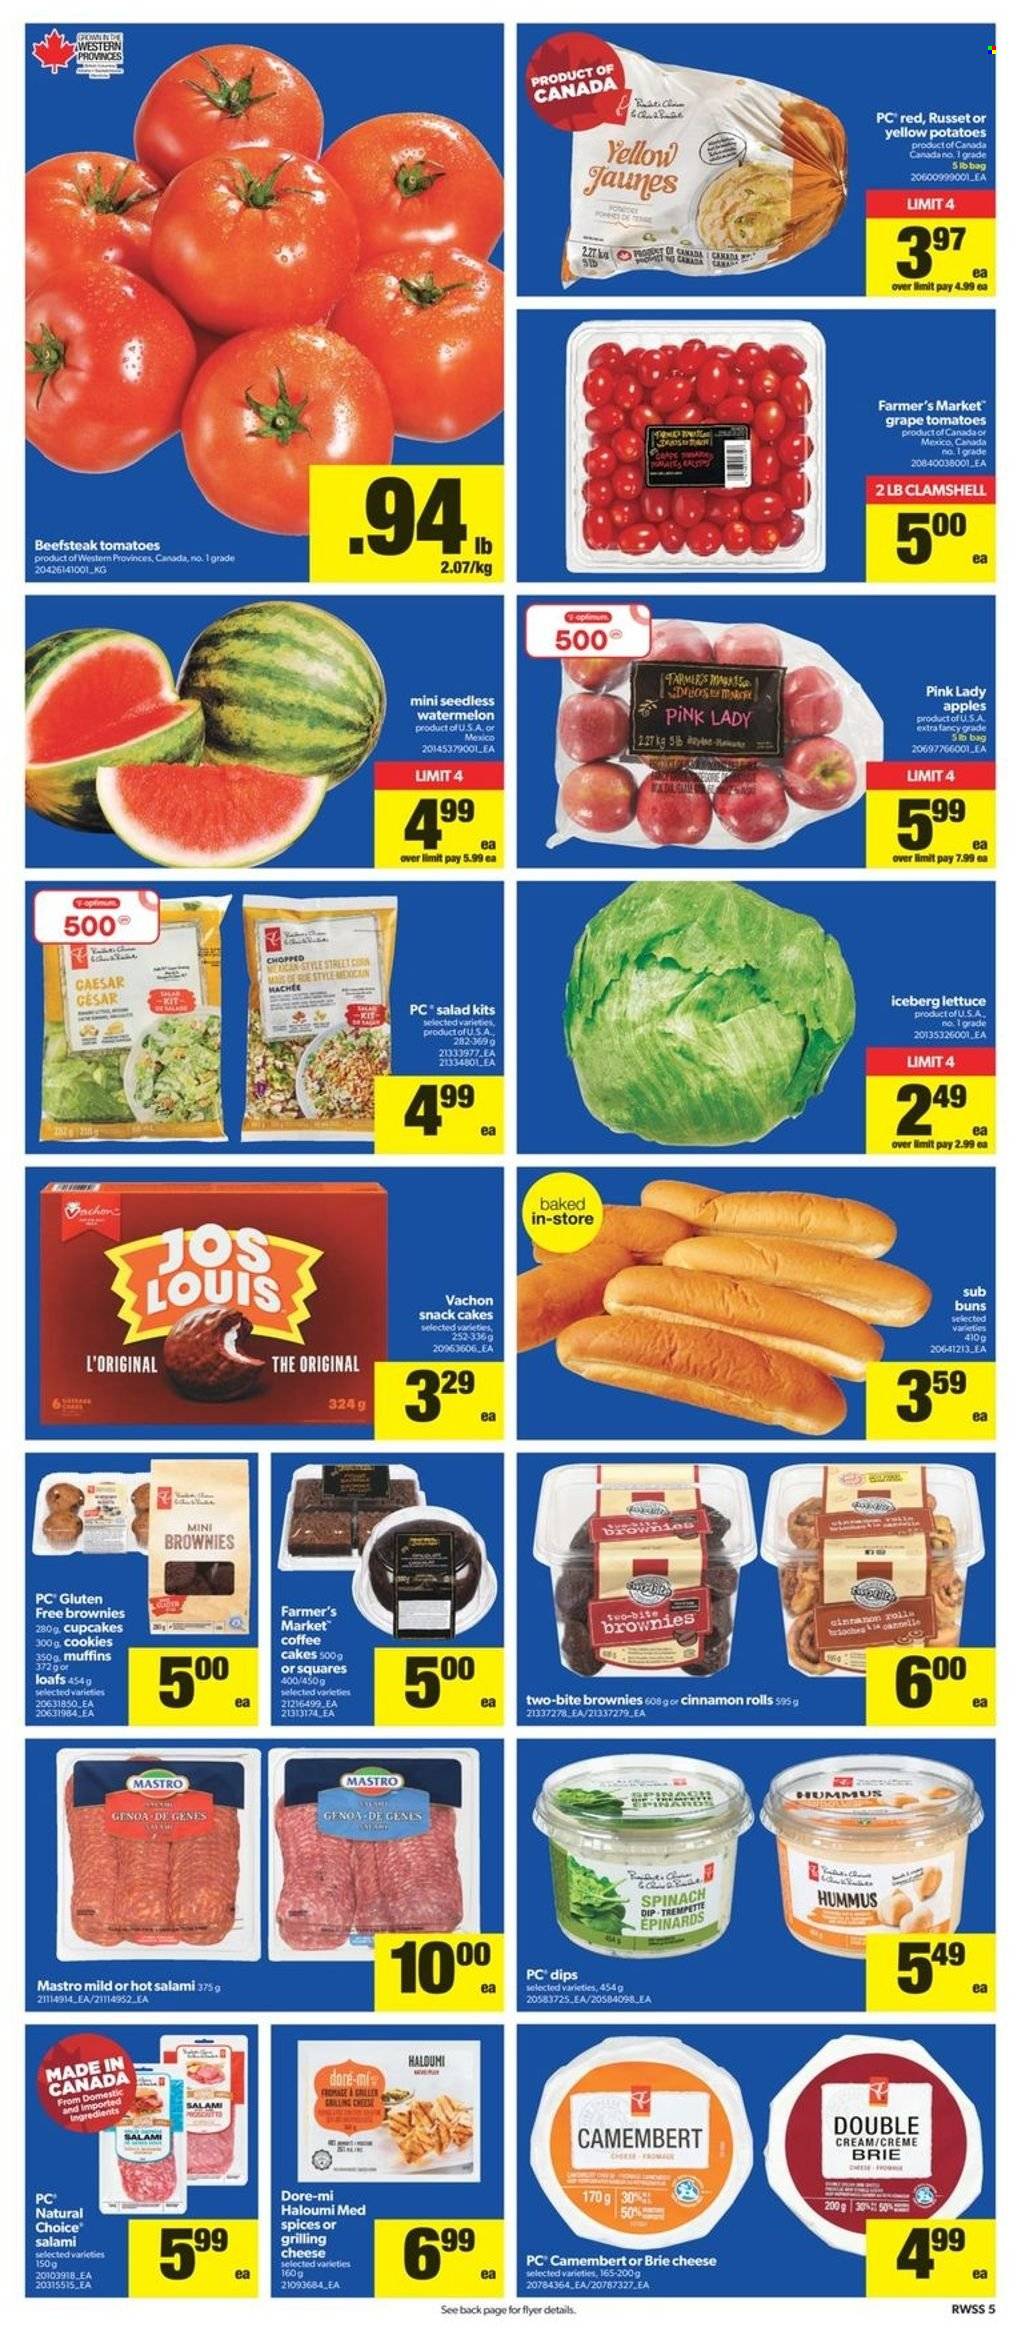 thumbnail - Real Canadian Superstore Flyer - May 12, 2022 - May 18, 2022 - Sales products - cake, buns, cinnamon roll, cupcake, brownies, muffin, corn, russet potatoes, tomatoes, potatoes, apples, watermelon, Pink Lady, salami, hummus, cheese, brie, cookies, snack, Optimum, camembert. Page 6.